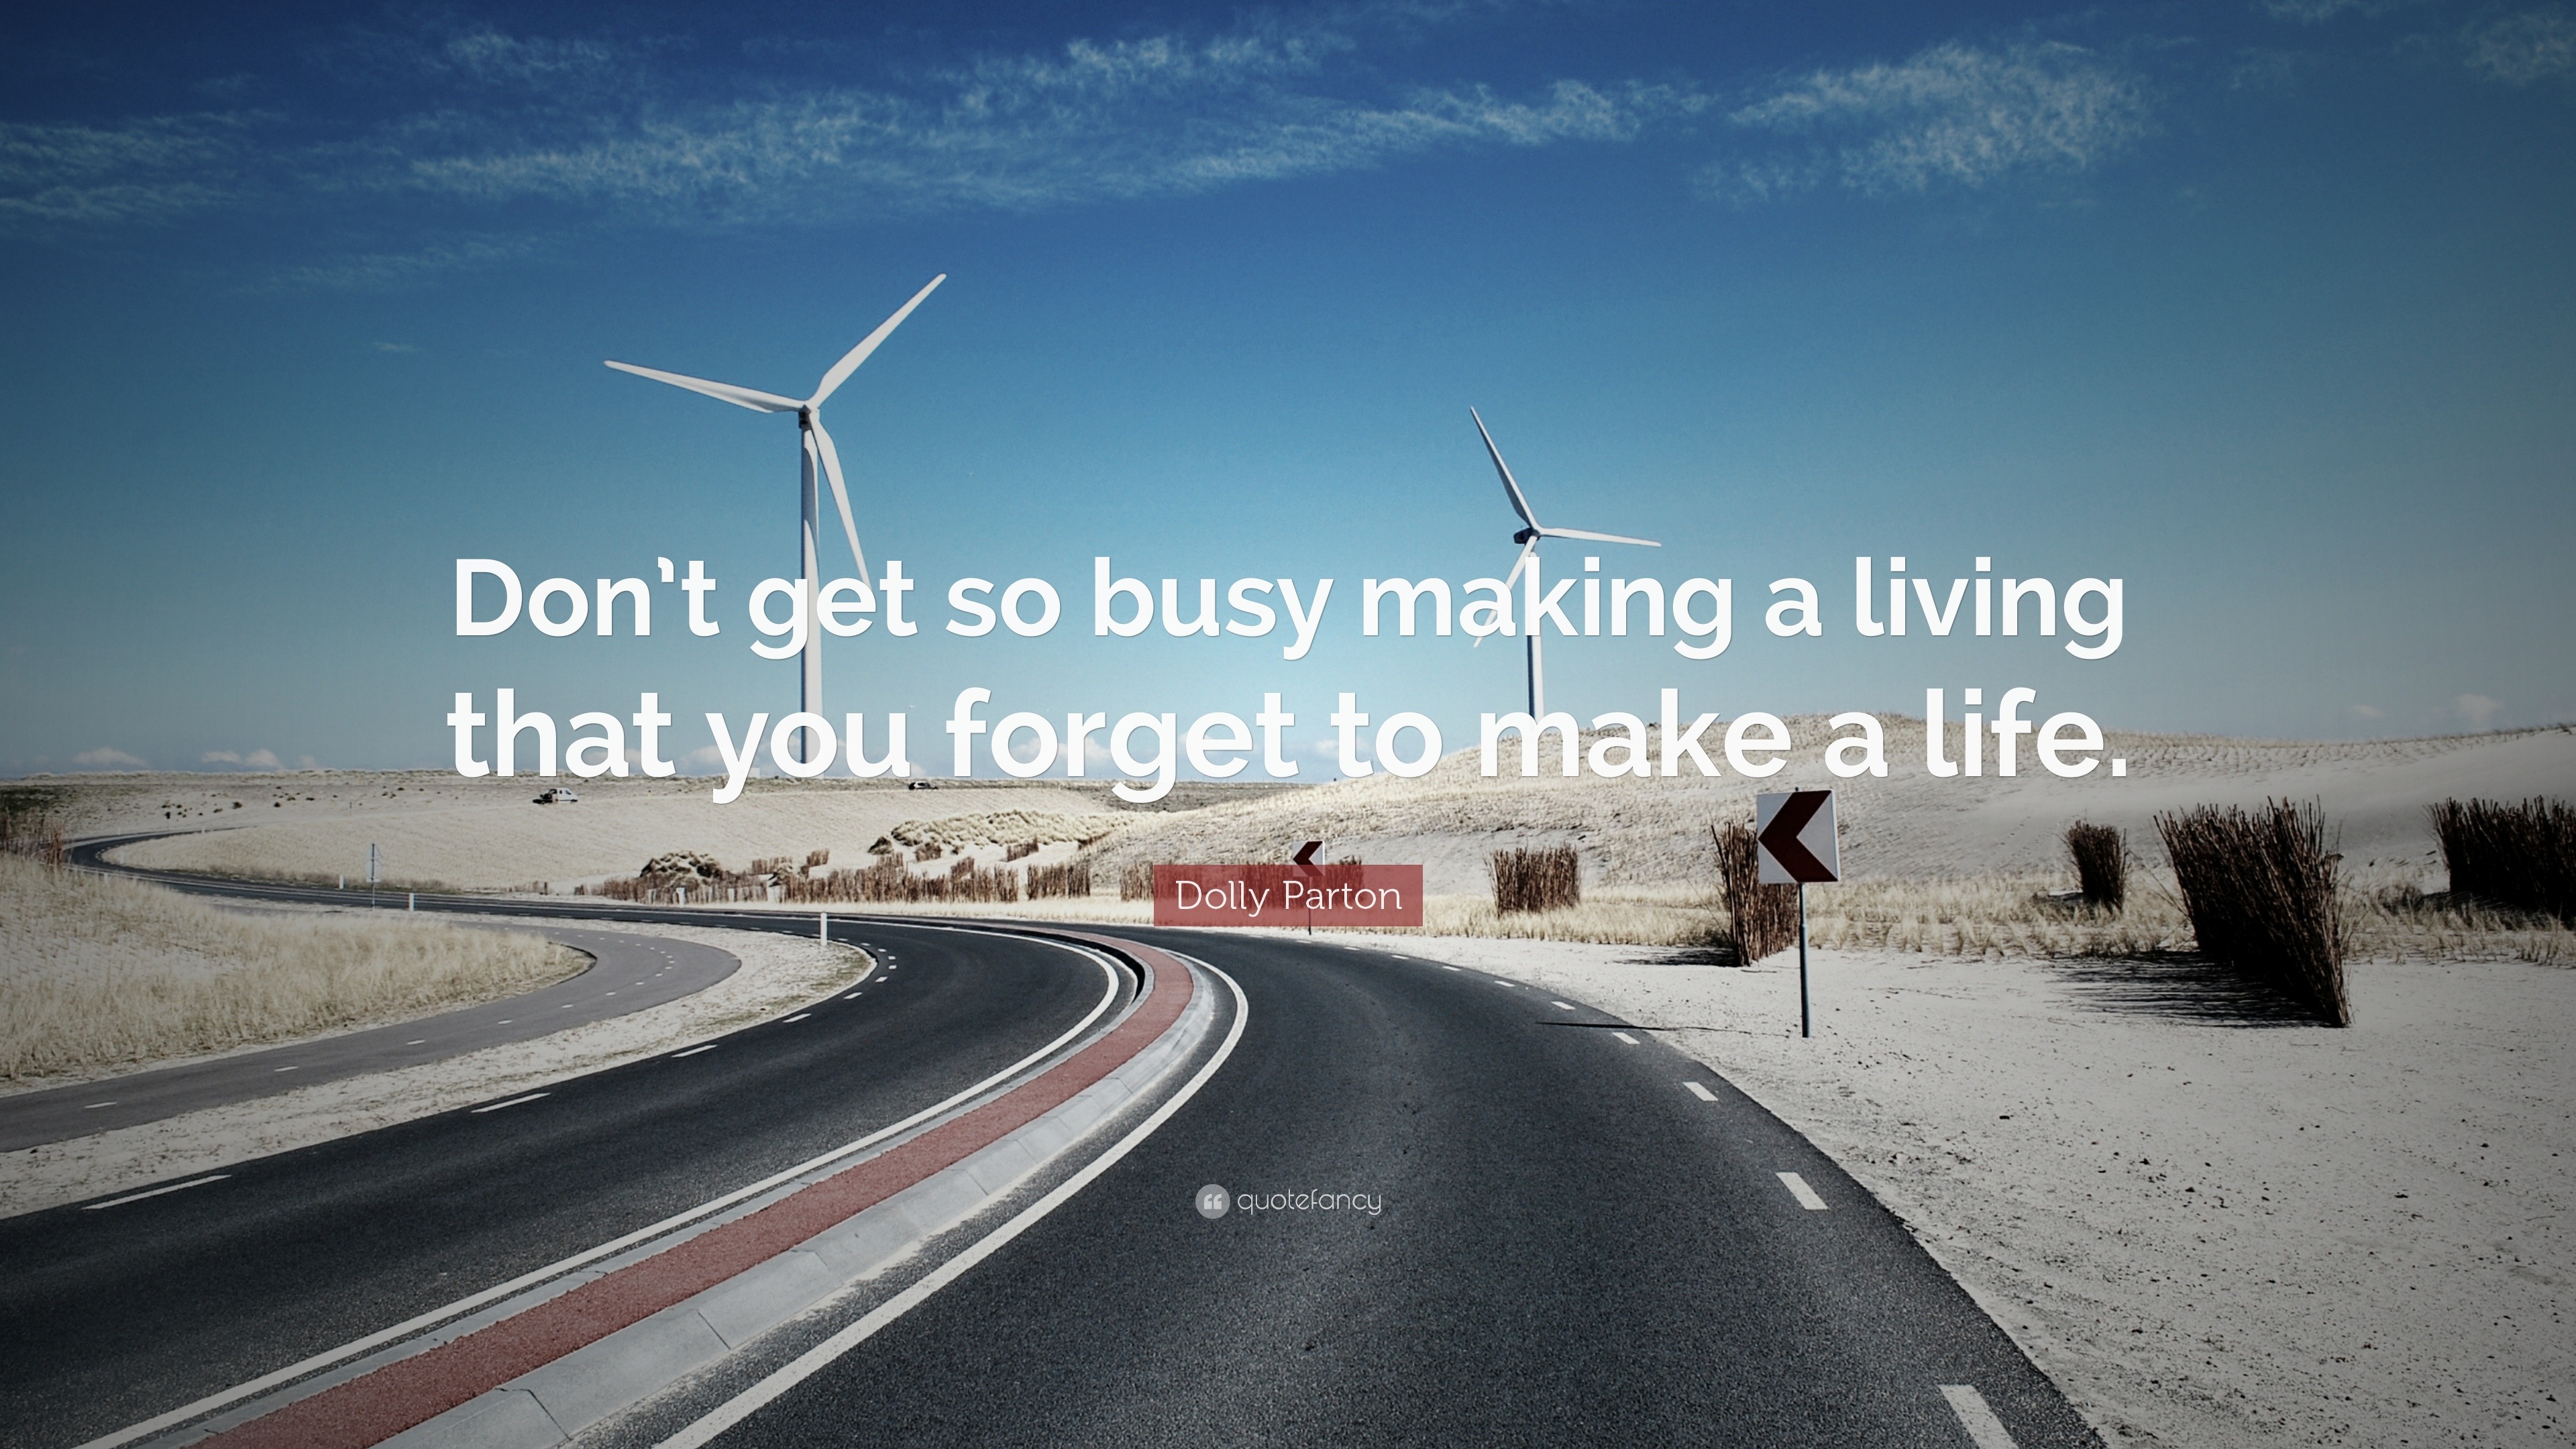 Dolly Parton Quote: "Don't get so busy making a living ...